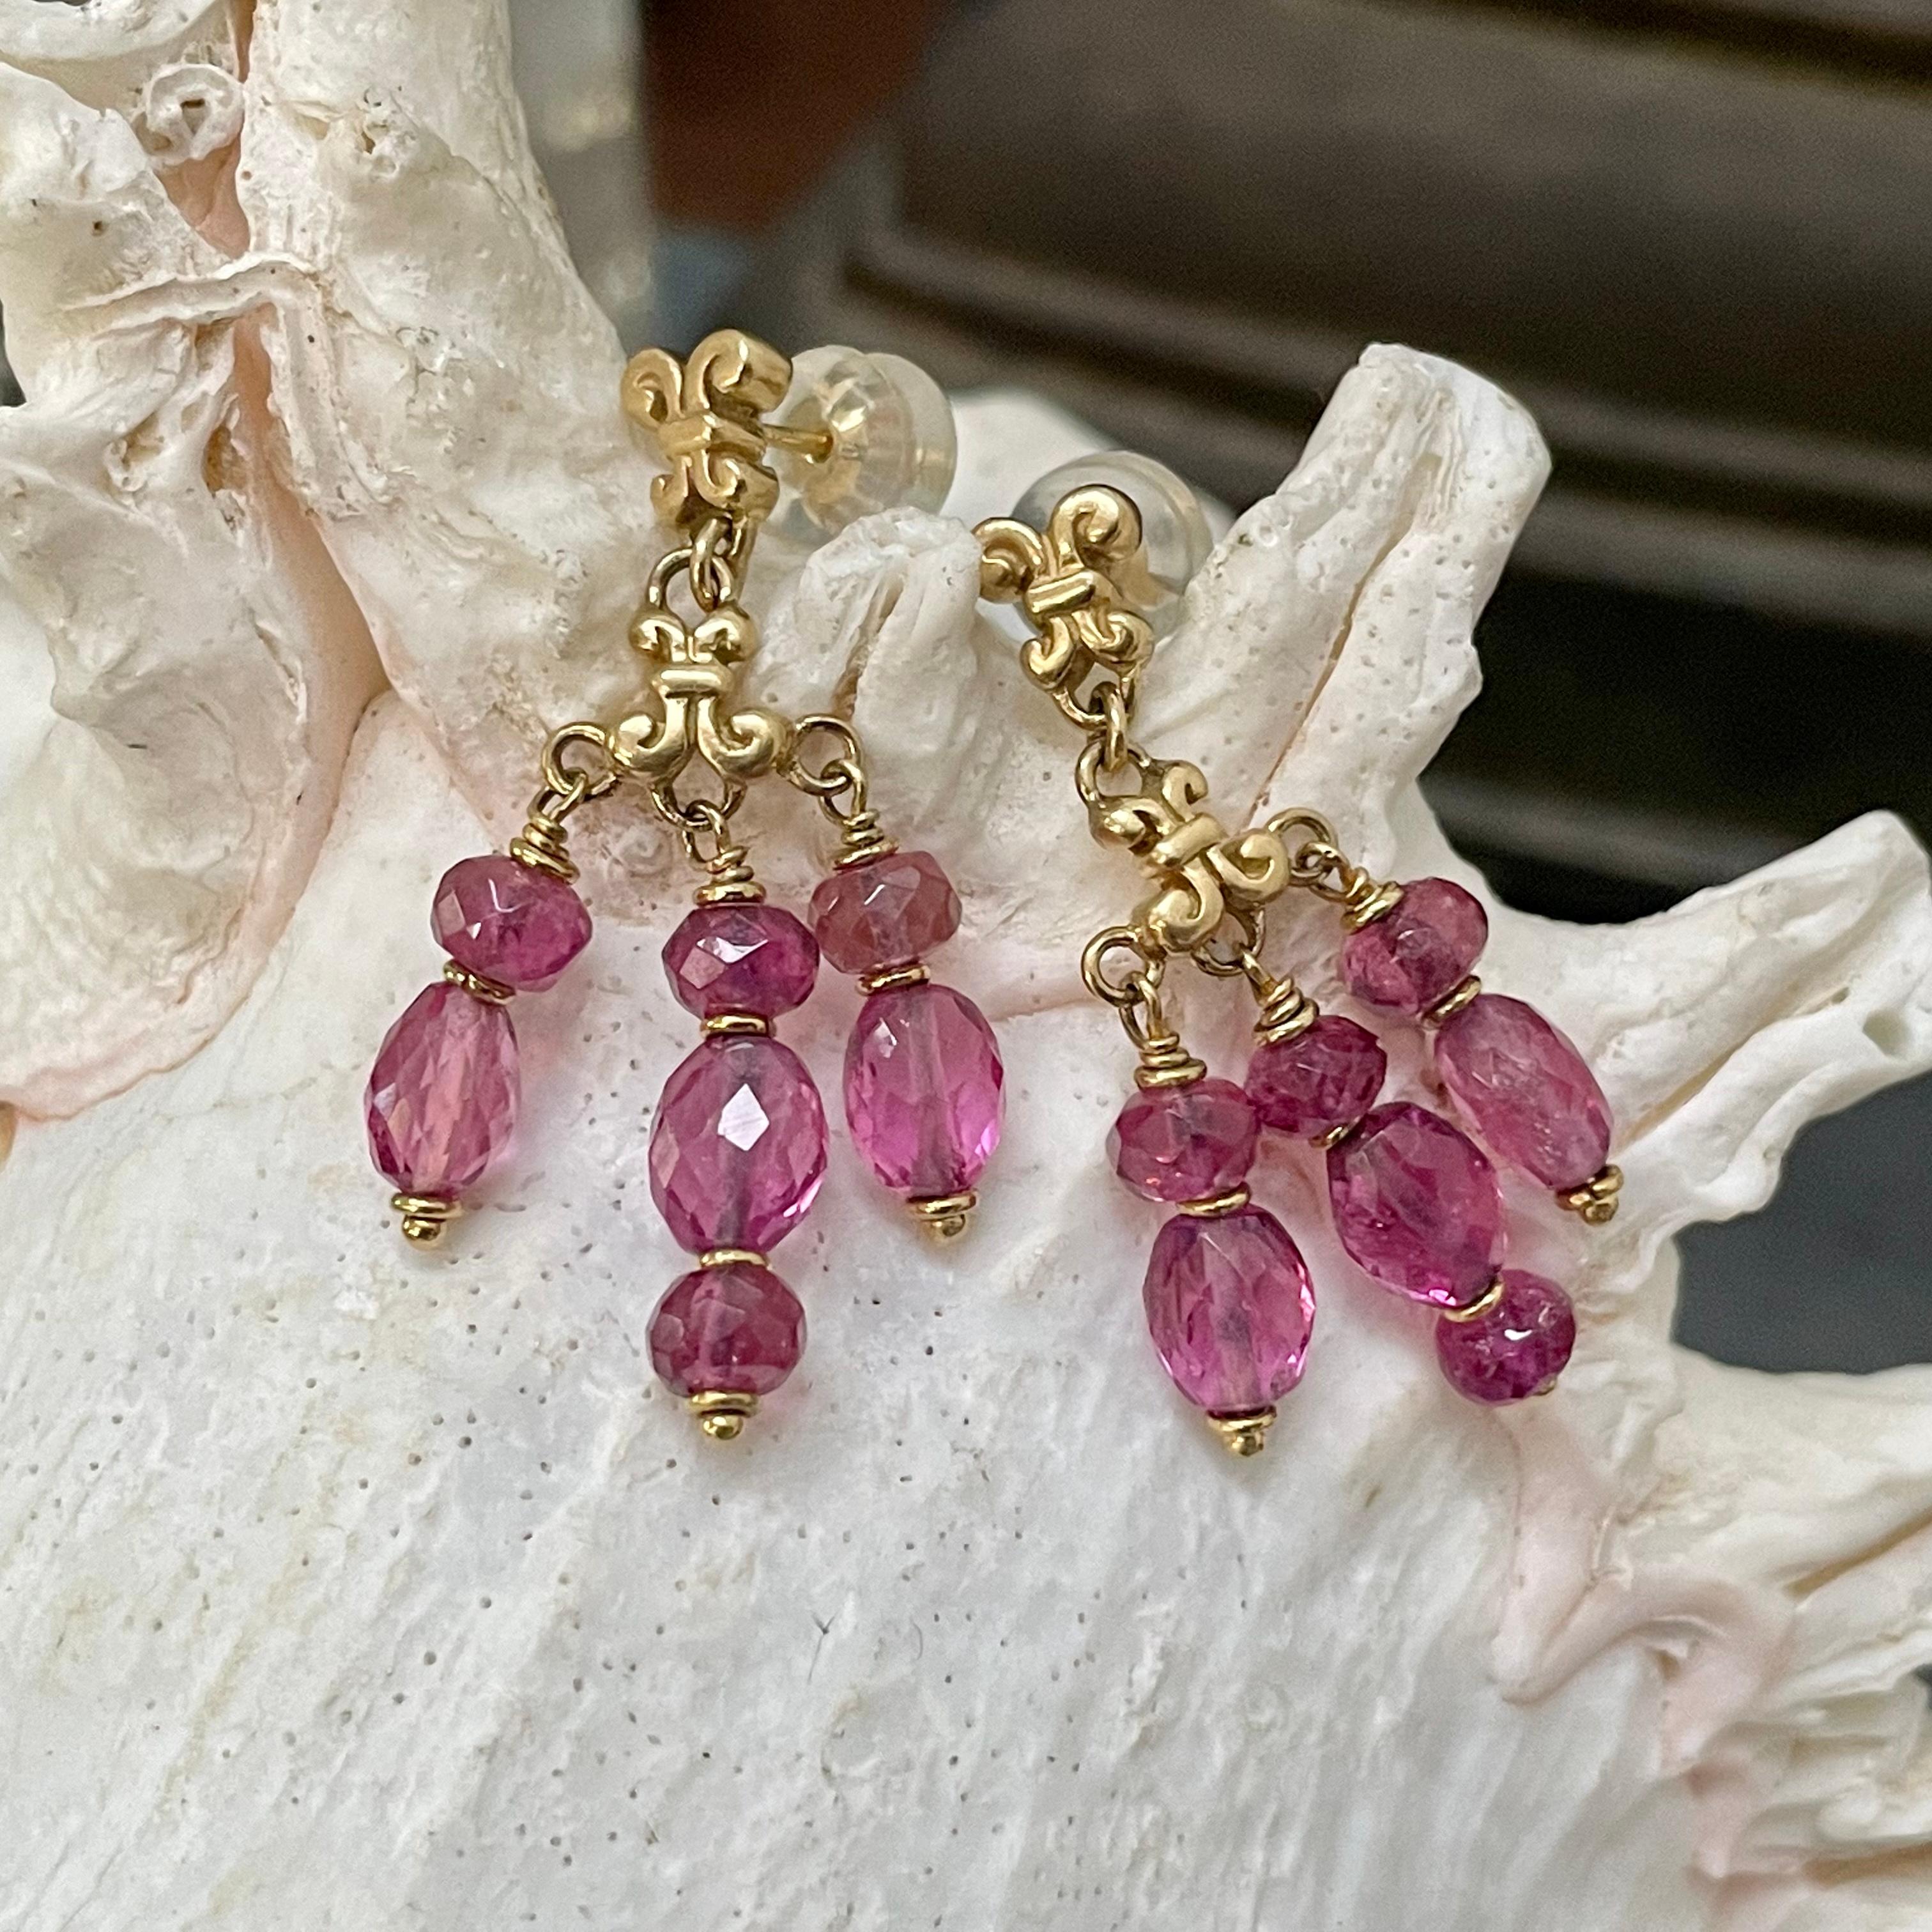 Uniquely designed wrapped spiral posts and similar opposing hanging components support graduated rose cut pink tourmaline beads with gold spacers in this elegant design. A lively interplay of pink to accent your look!